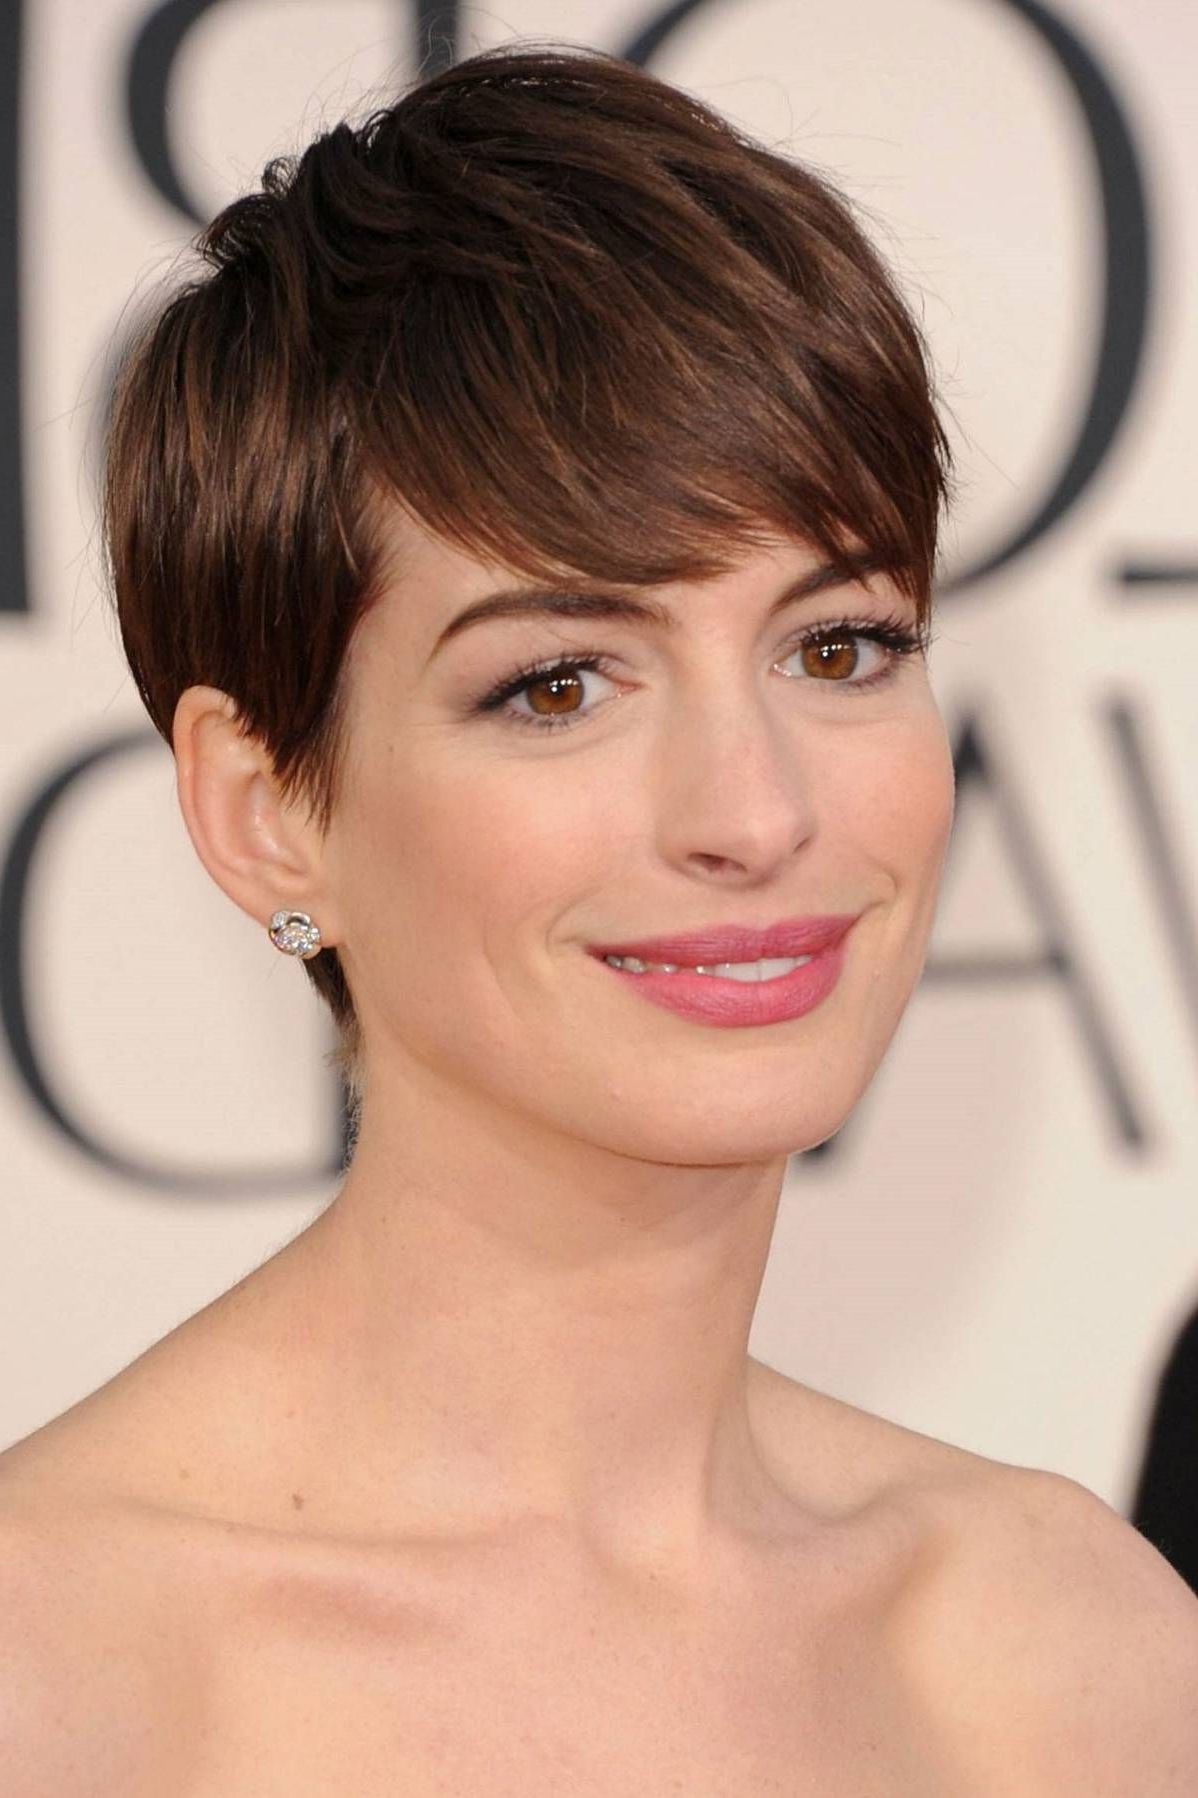 26 Of The Best Short Haircuts In History | I Need A New Haircut Pertaining To Anne Hathaway Short Hairstyles (Photo 24 of 25)